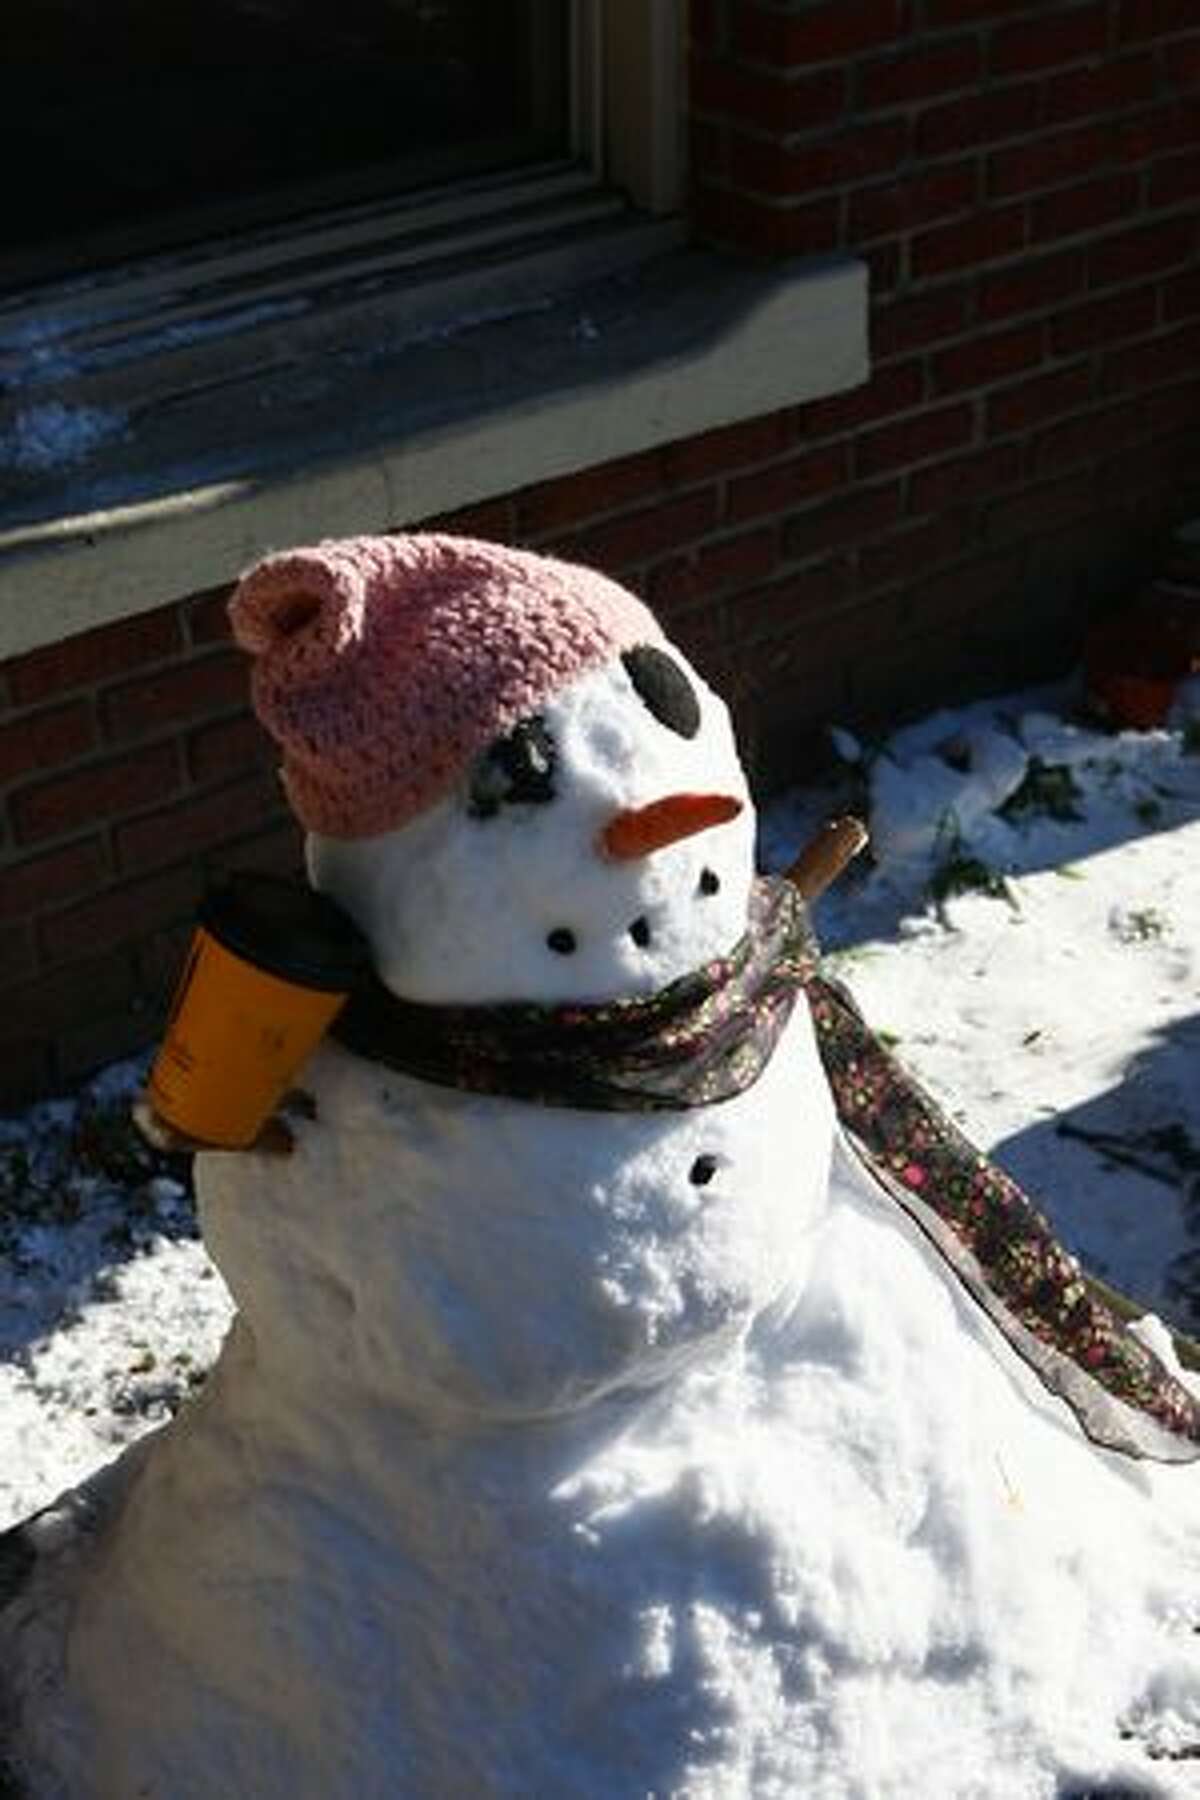 Caffeinated snowman does not care for the sunshine.